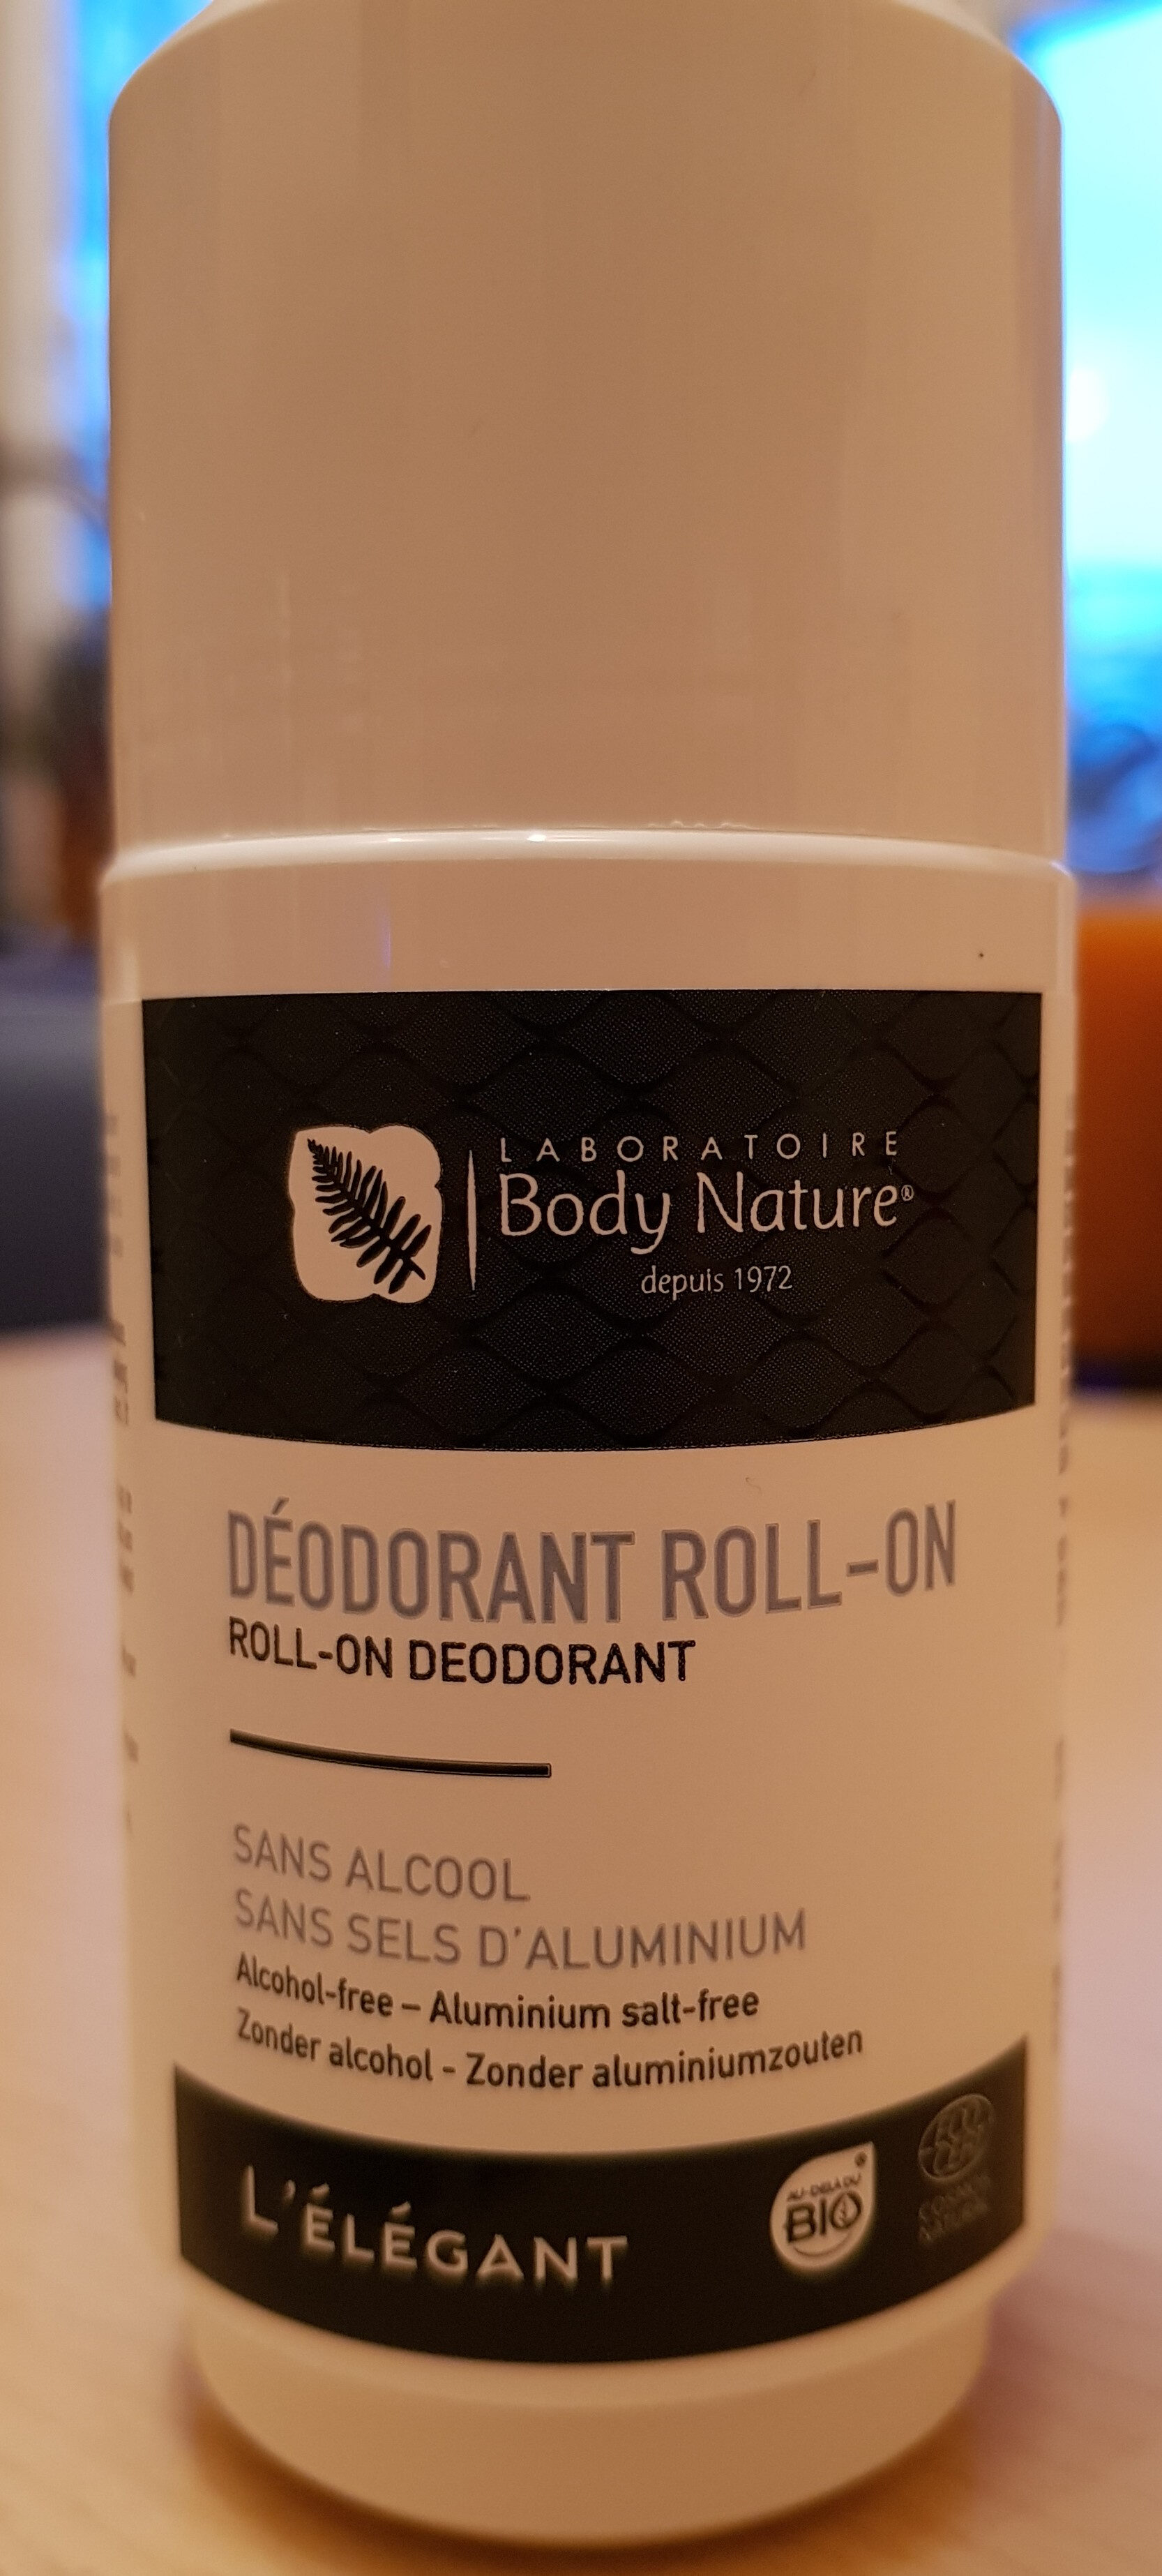 déodorant roll-on - Product - fr